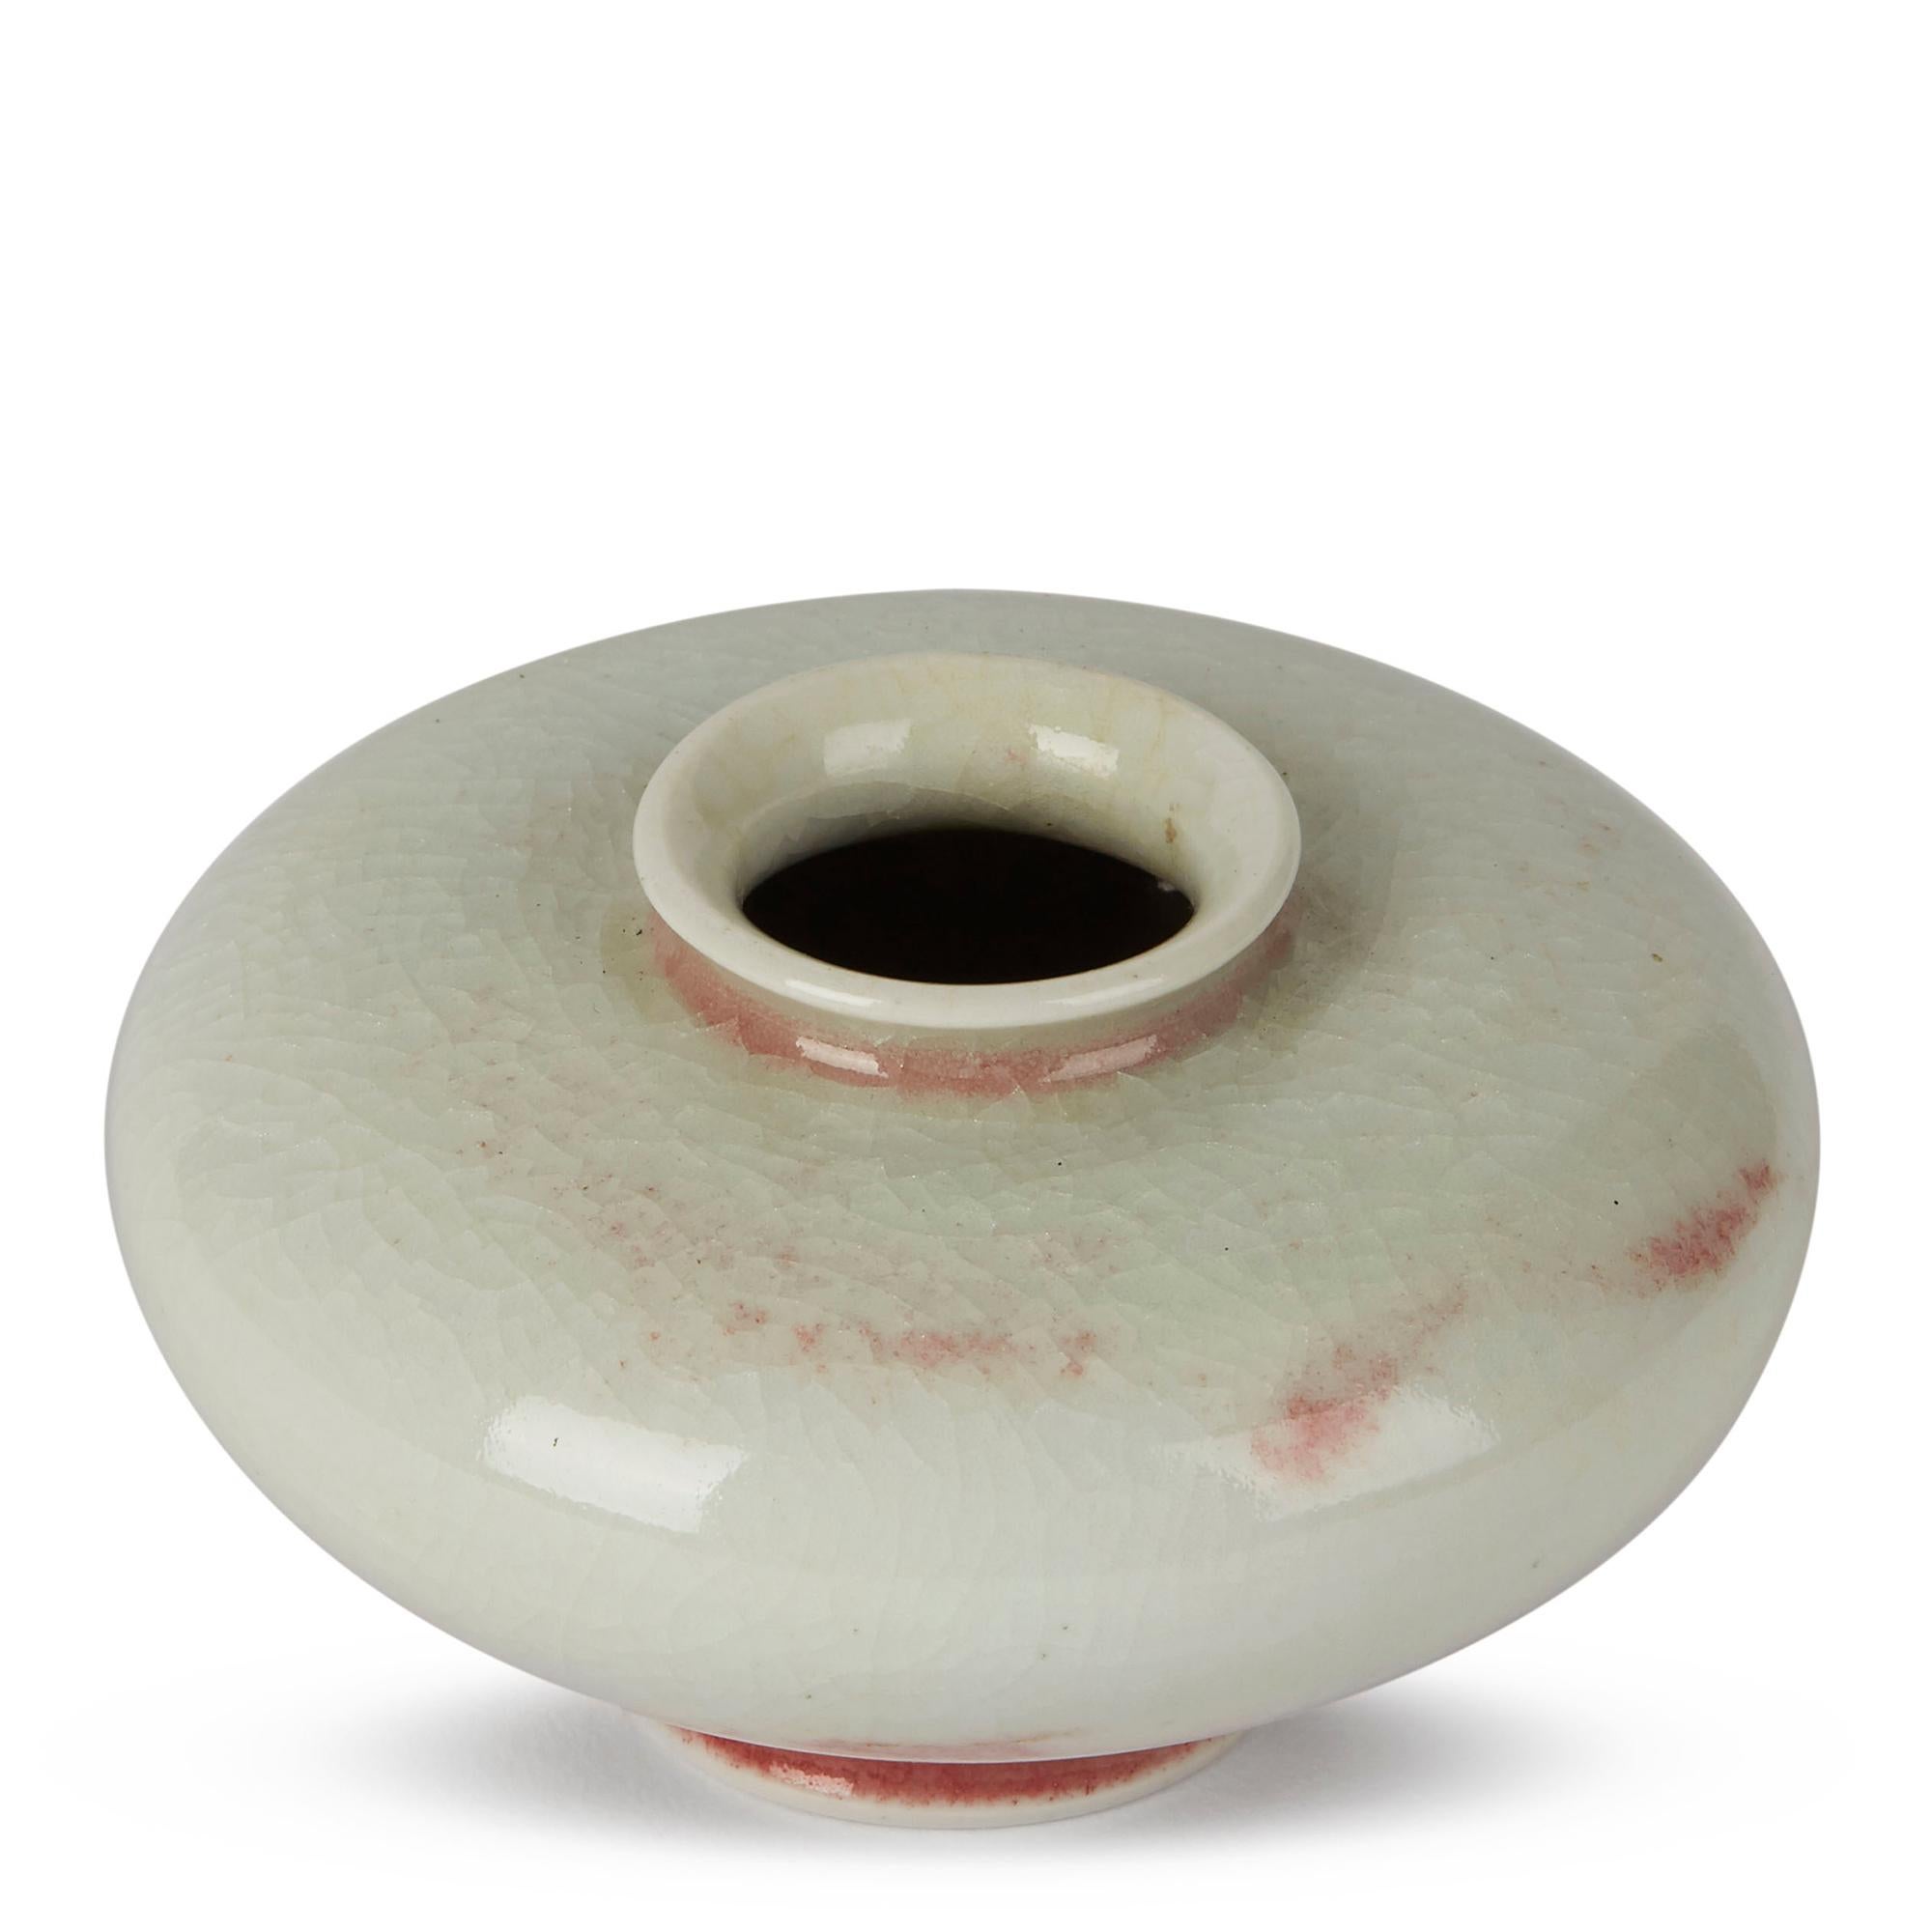 William Mehornay Studio Pottery Porcelain Red and White Vase, 1980-1985 In Excellent Condition For Sale In Bishop's Stortford, Hertfordshire